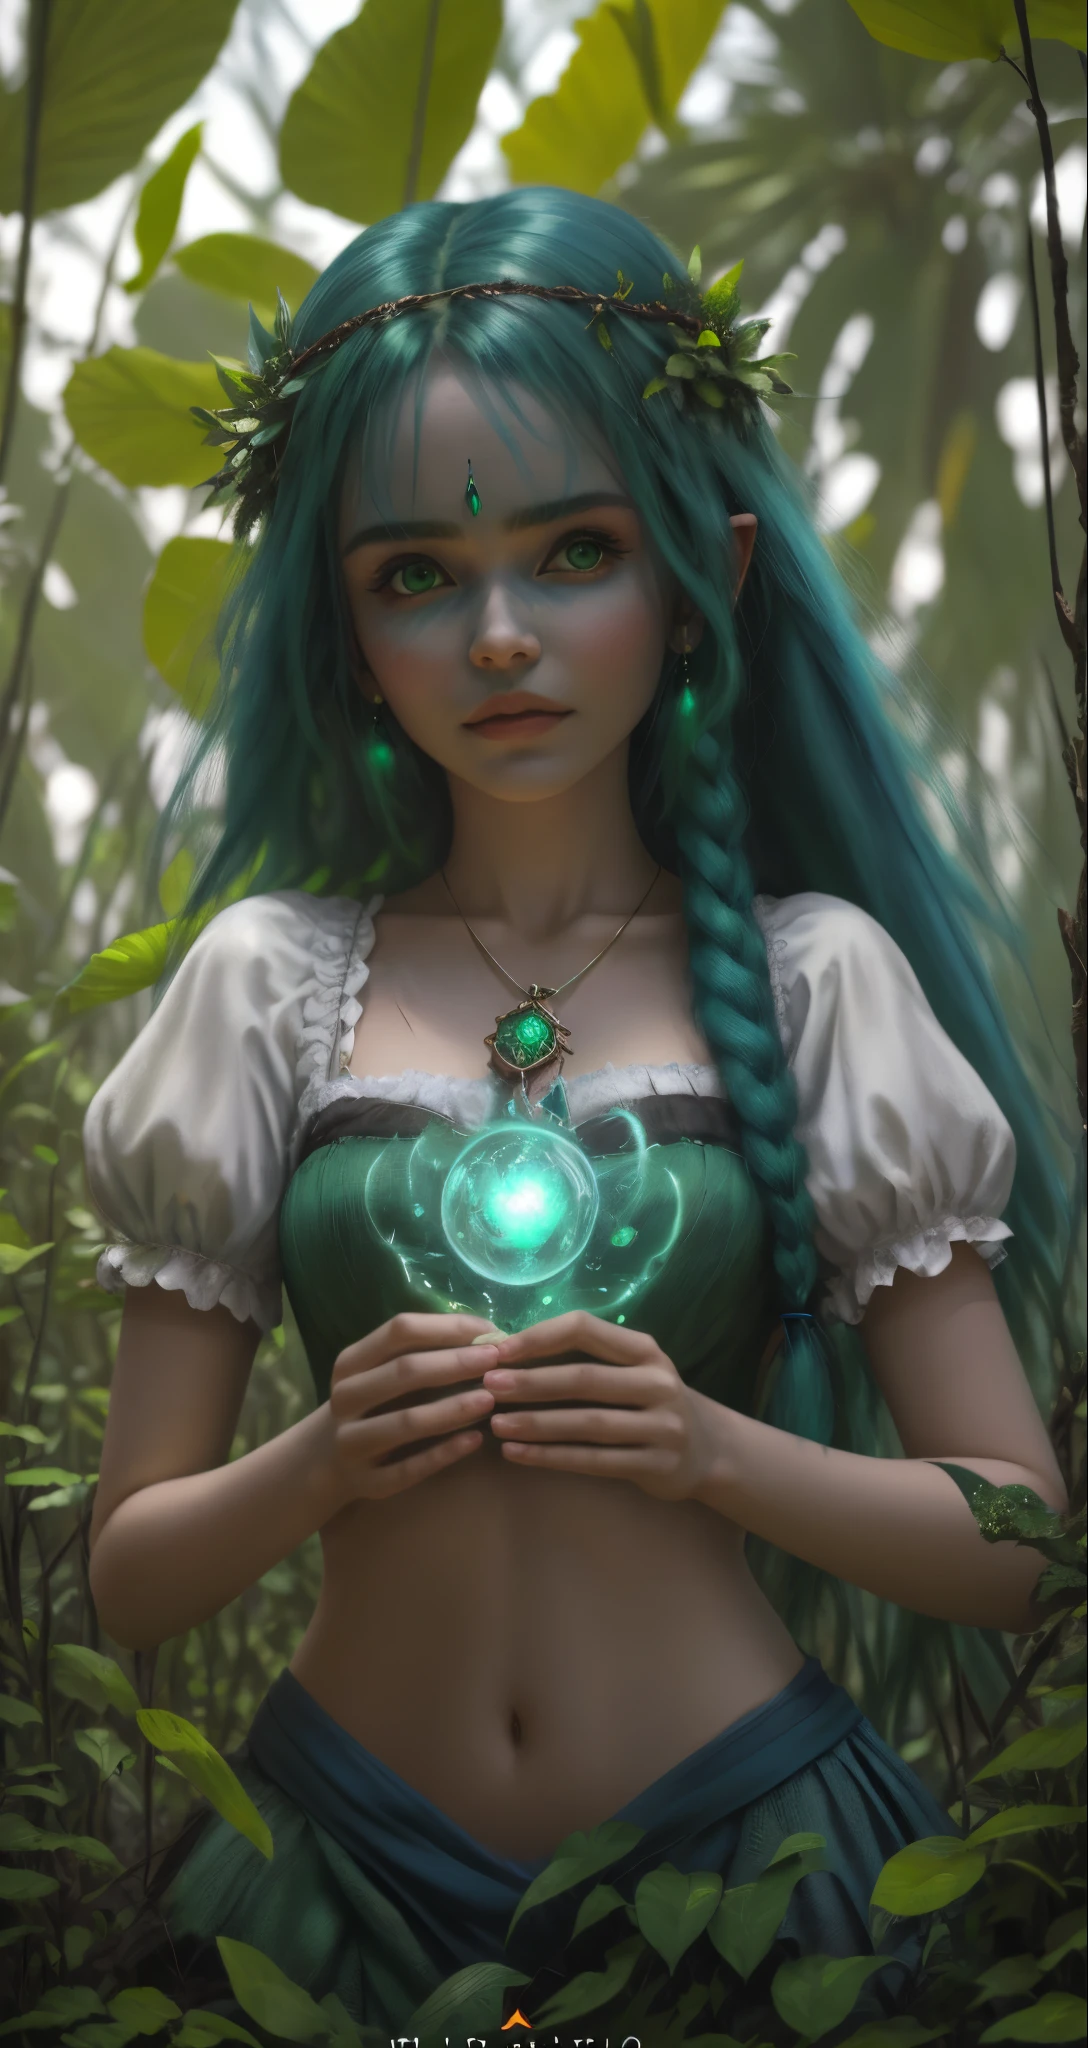 blue hair girl, a girl in the forest, fantasy movie poster, blue hair girl,  girl in a forest at dusk, magic everywhere, sunset, jinx from arcane, girl in a garden full of flowers, traces of green magic, green magic